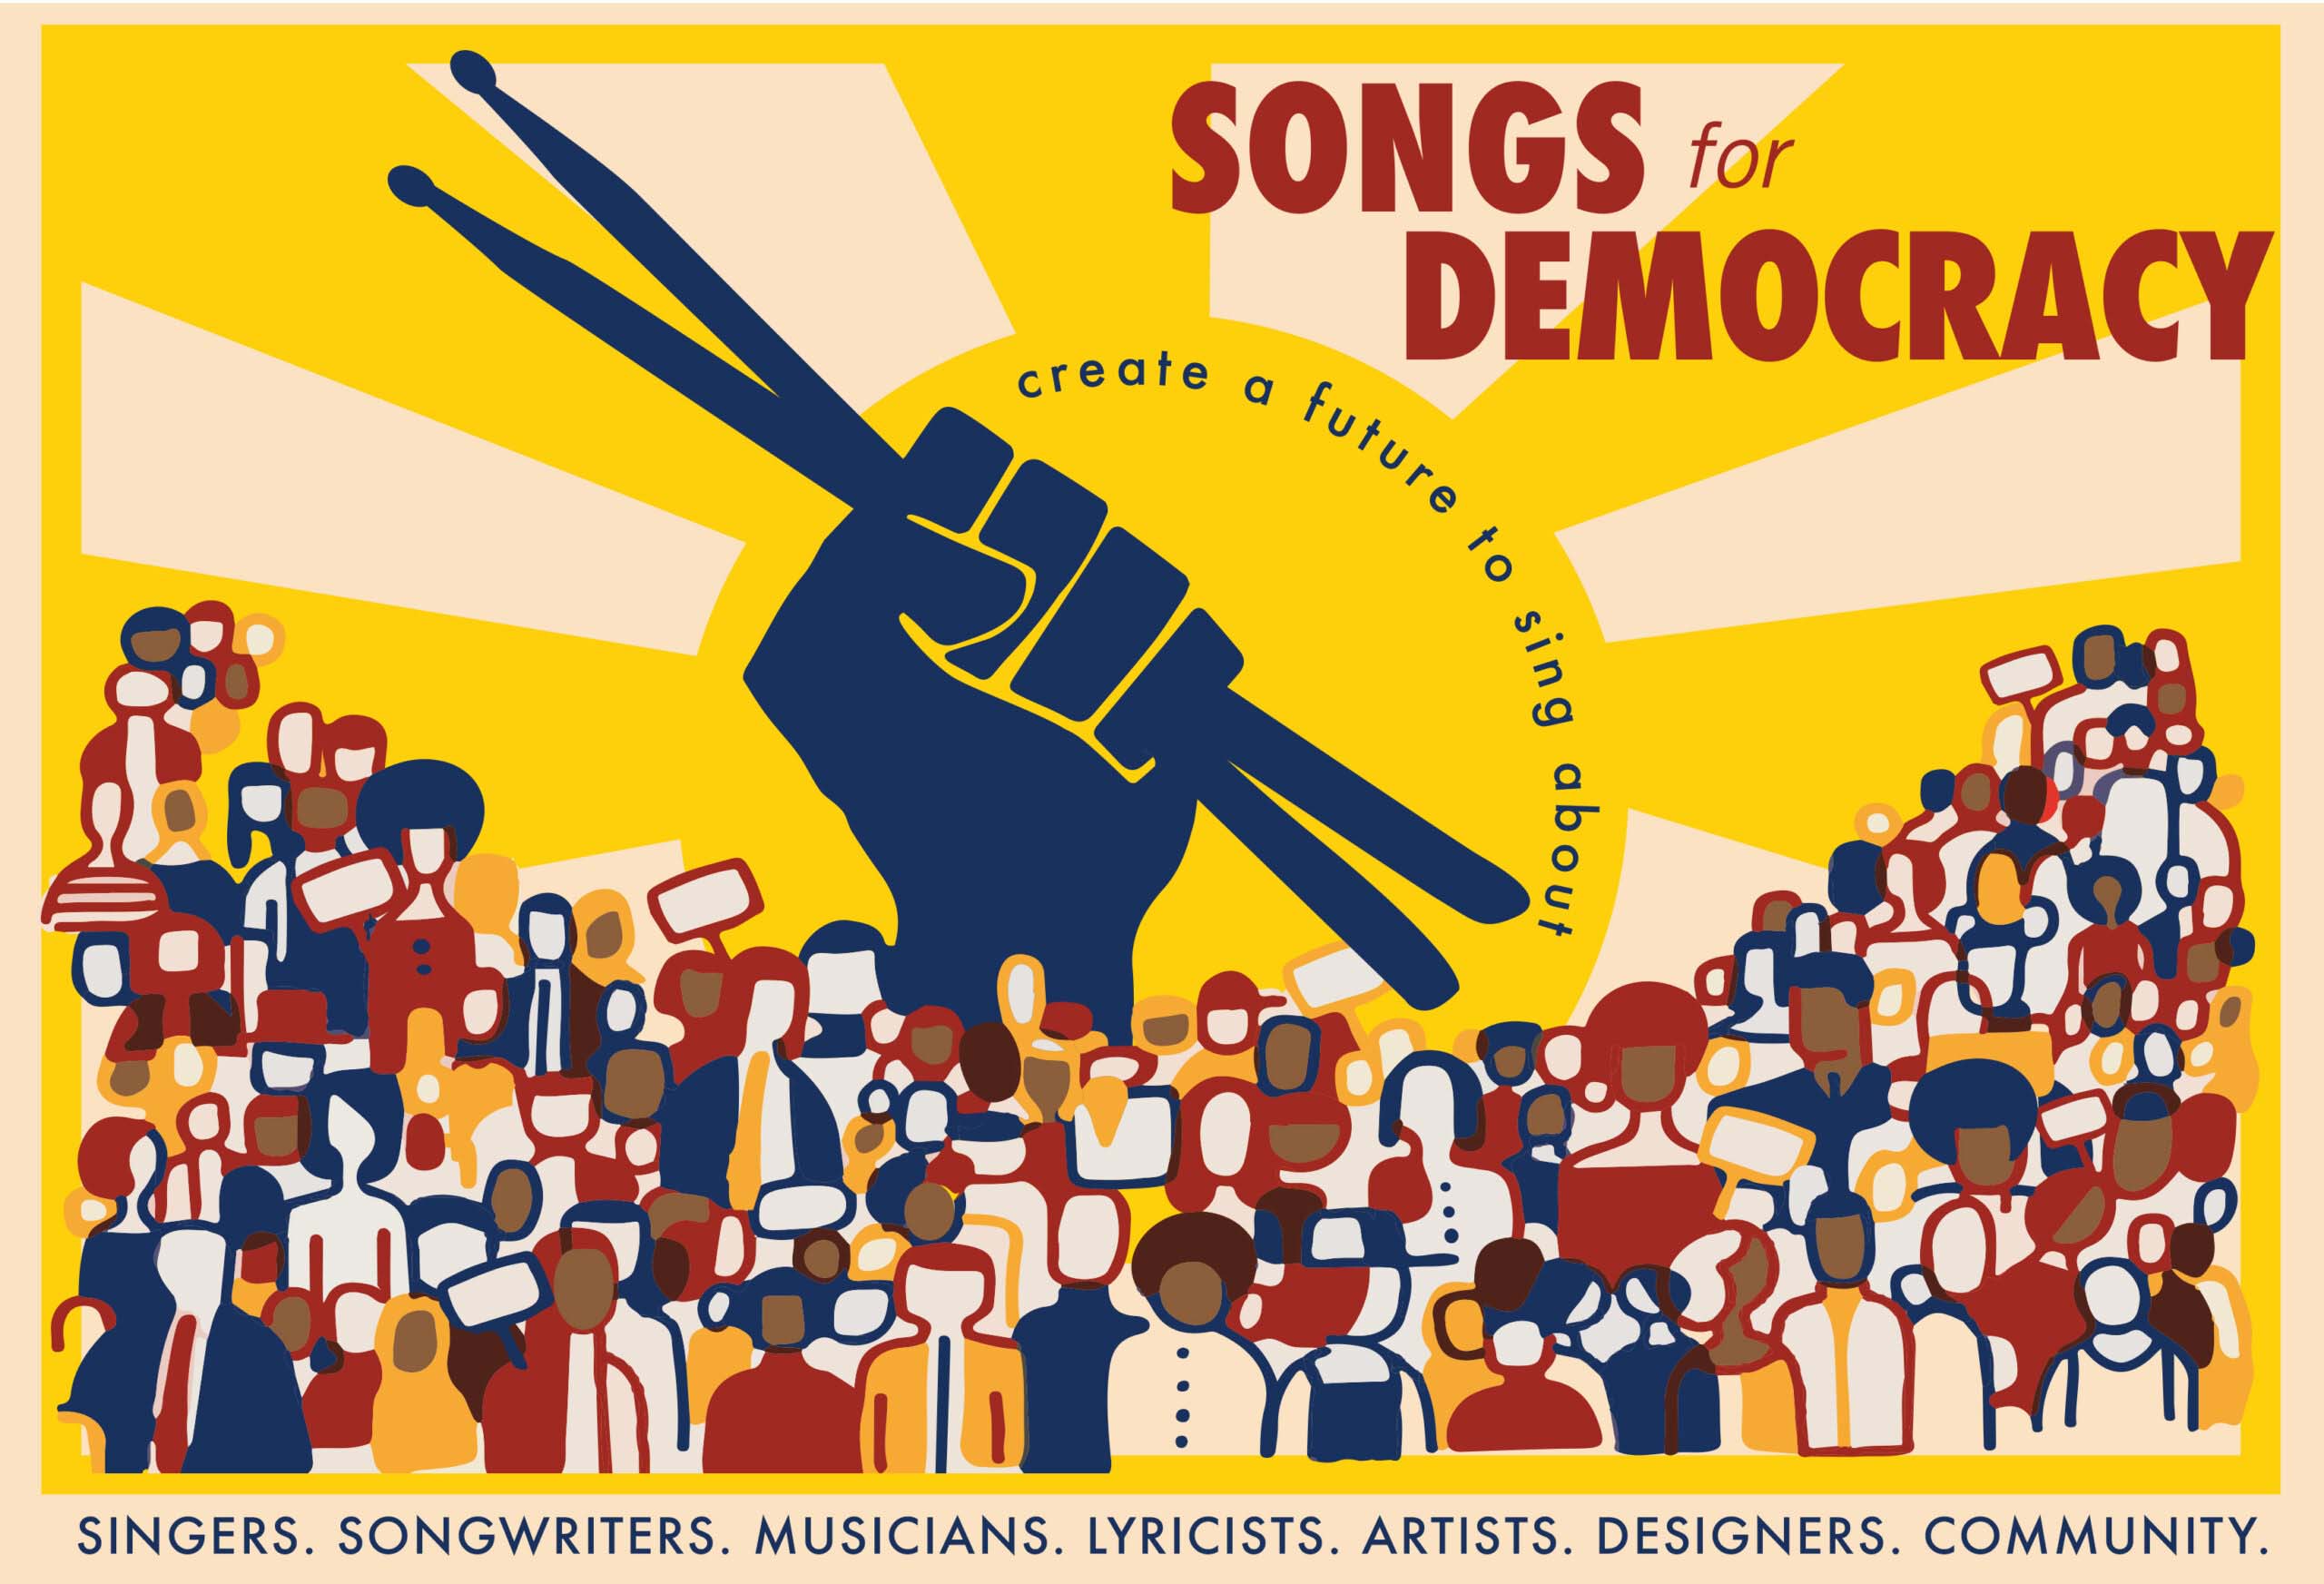 Songs for Democracy poster - "create a future to sing about"